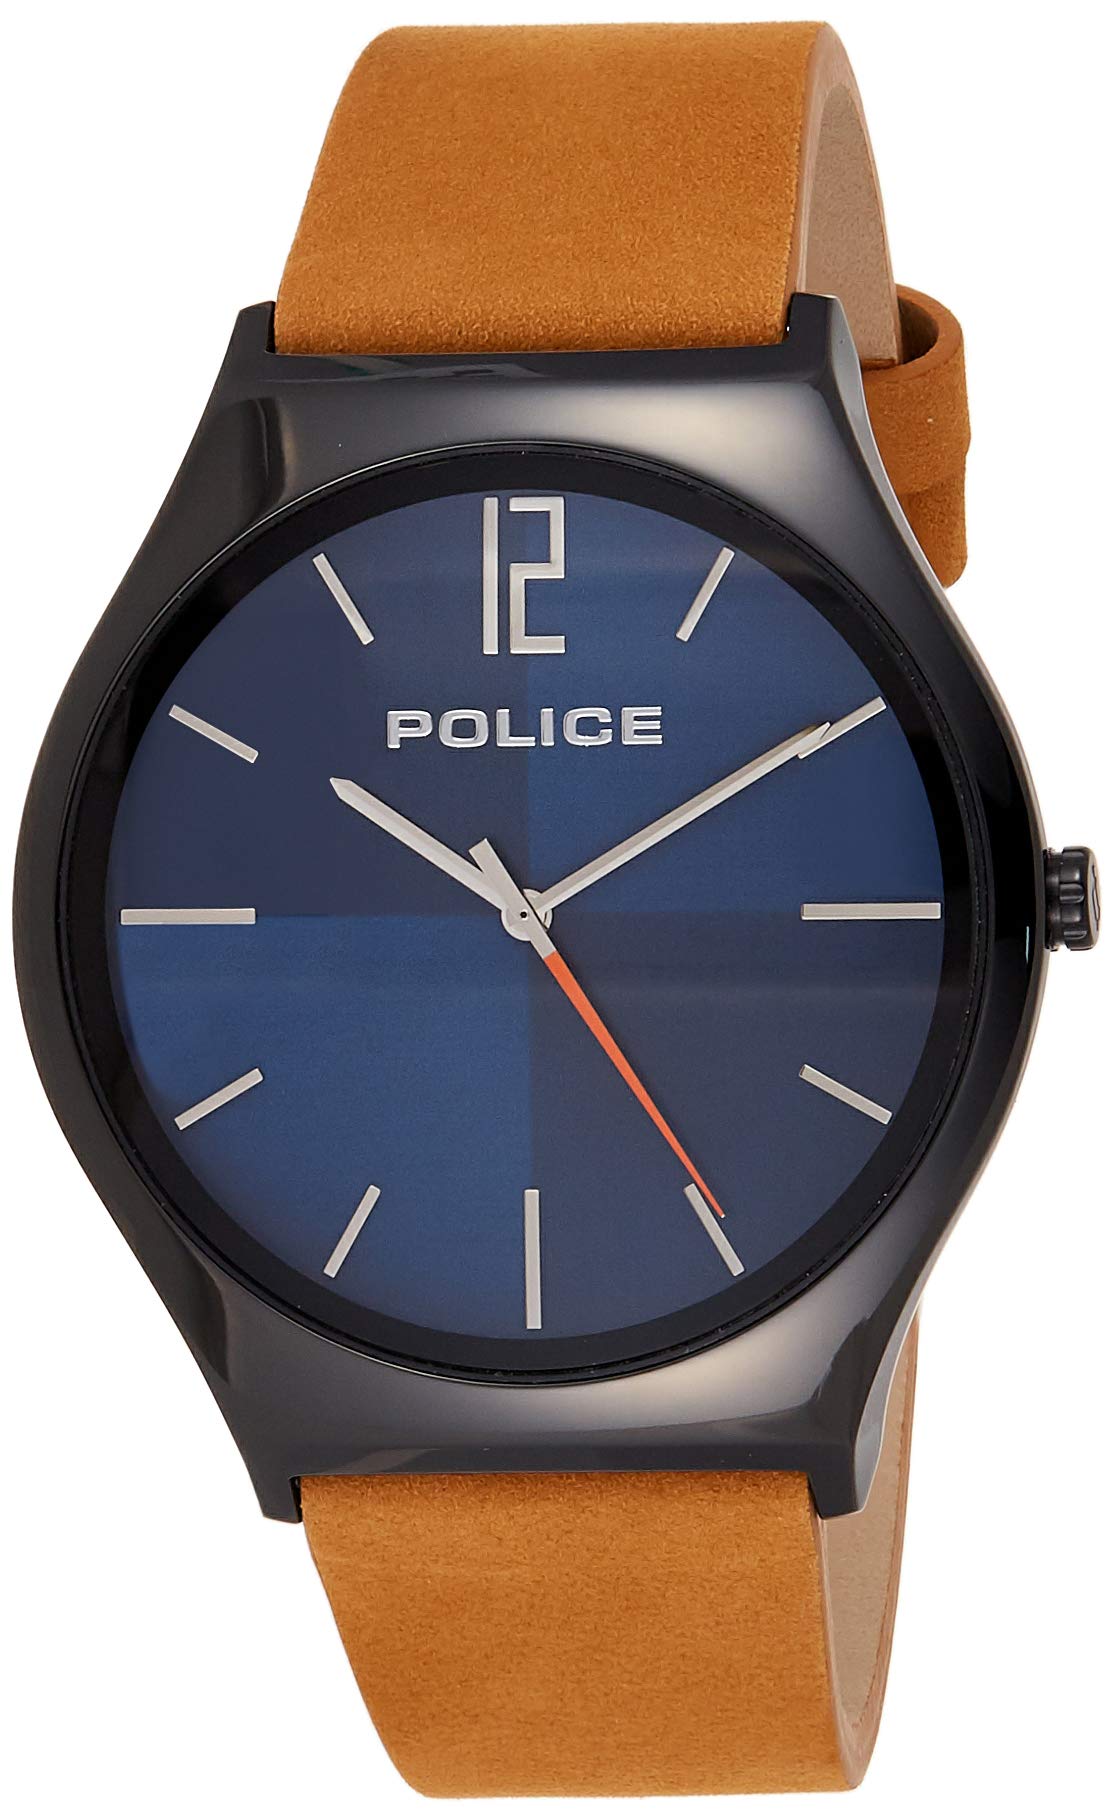 POLICE OUTLET Quartz Watch with Leather Strap 4895220904223